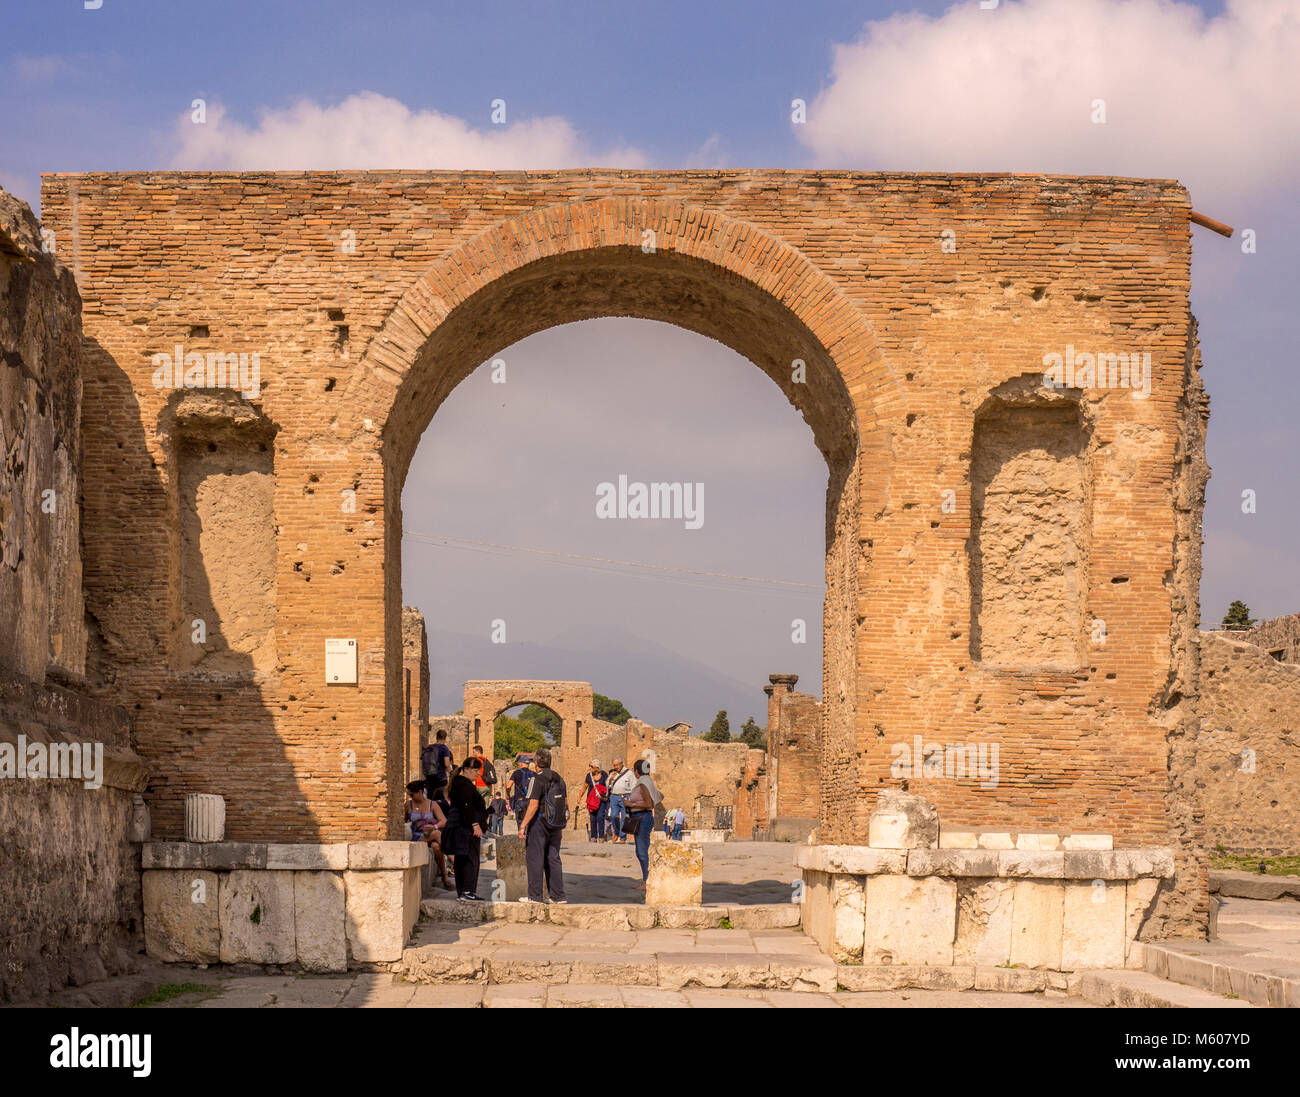 Honorary arches and tourists at the Pompeii ruins, Italy. Stock Photo